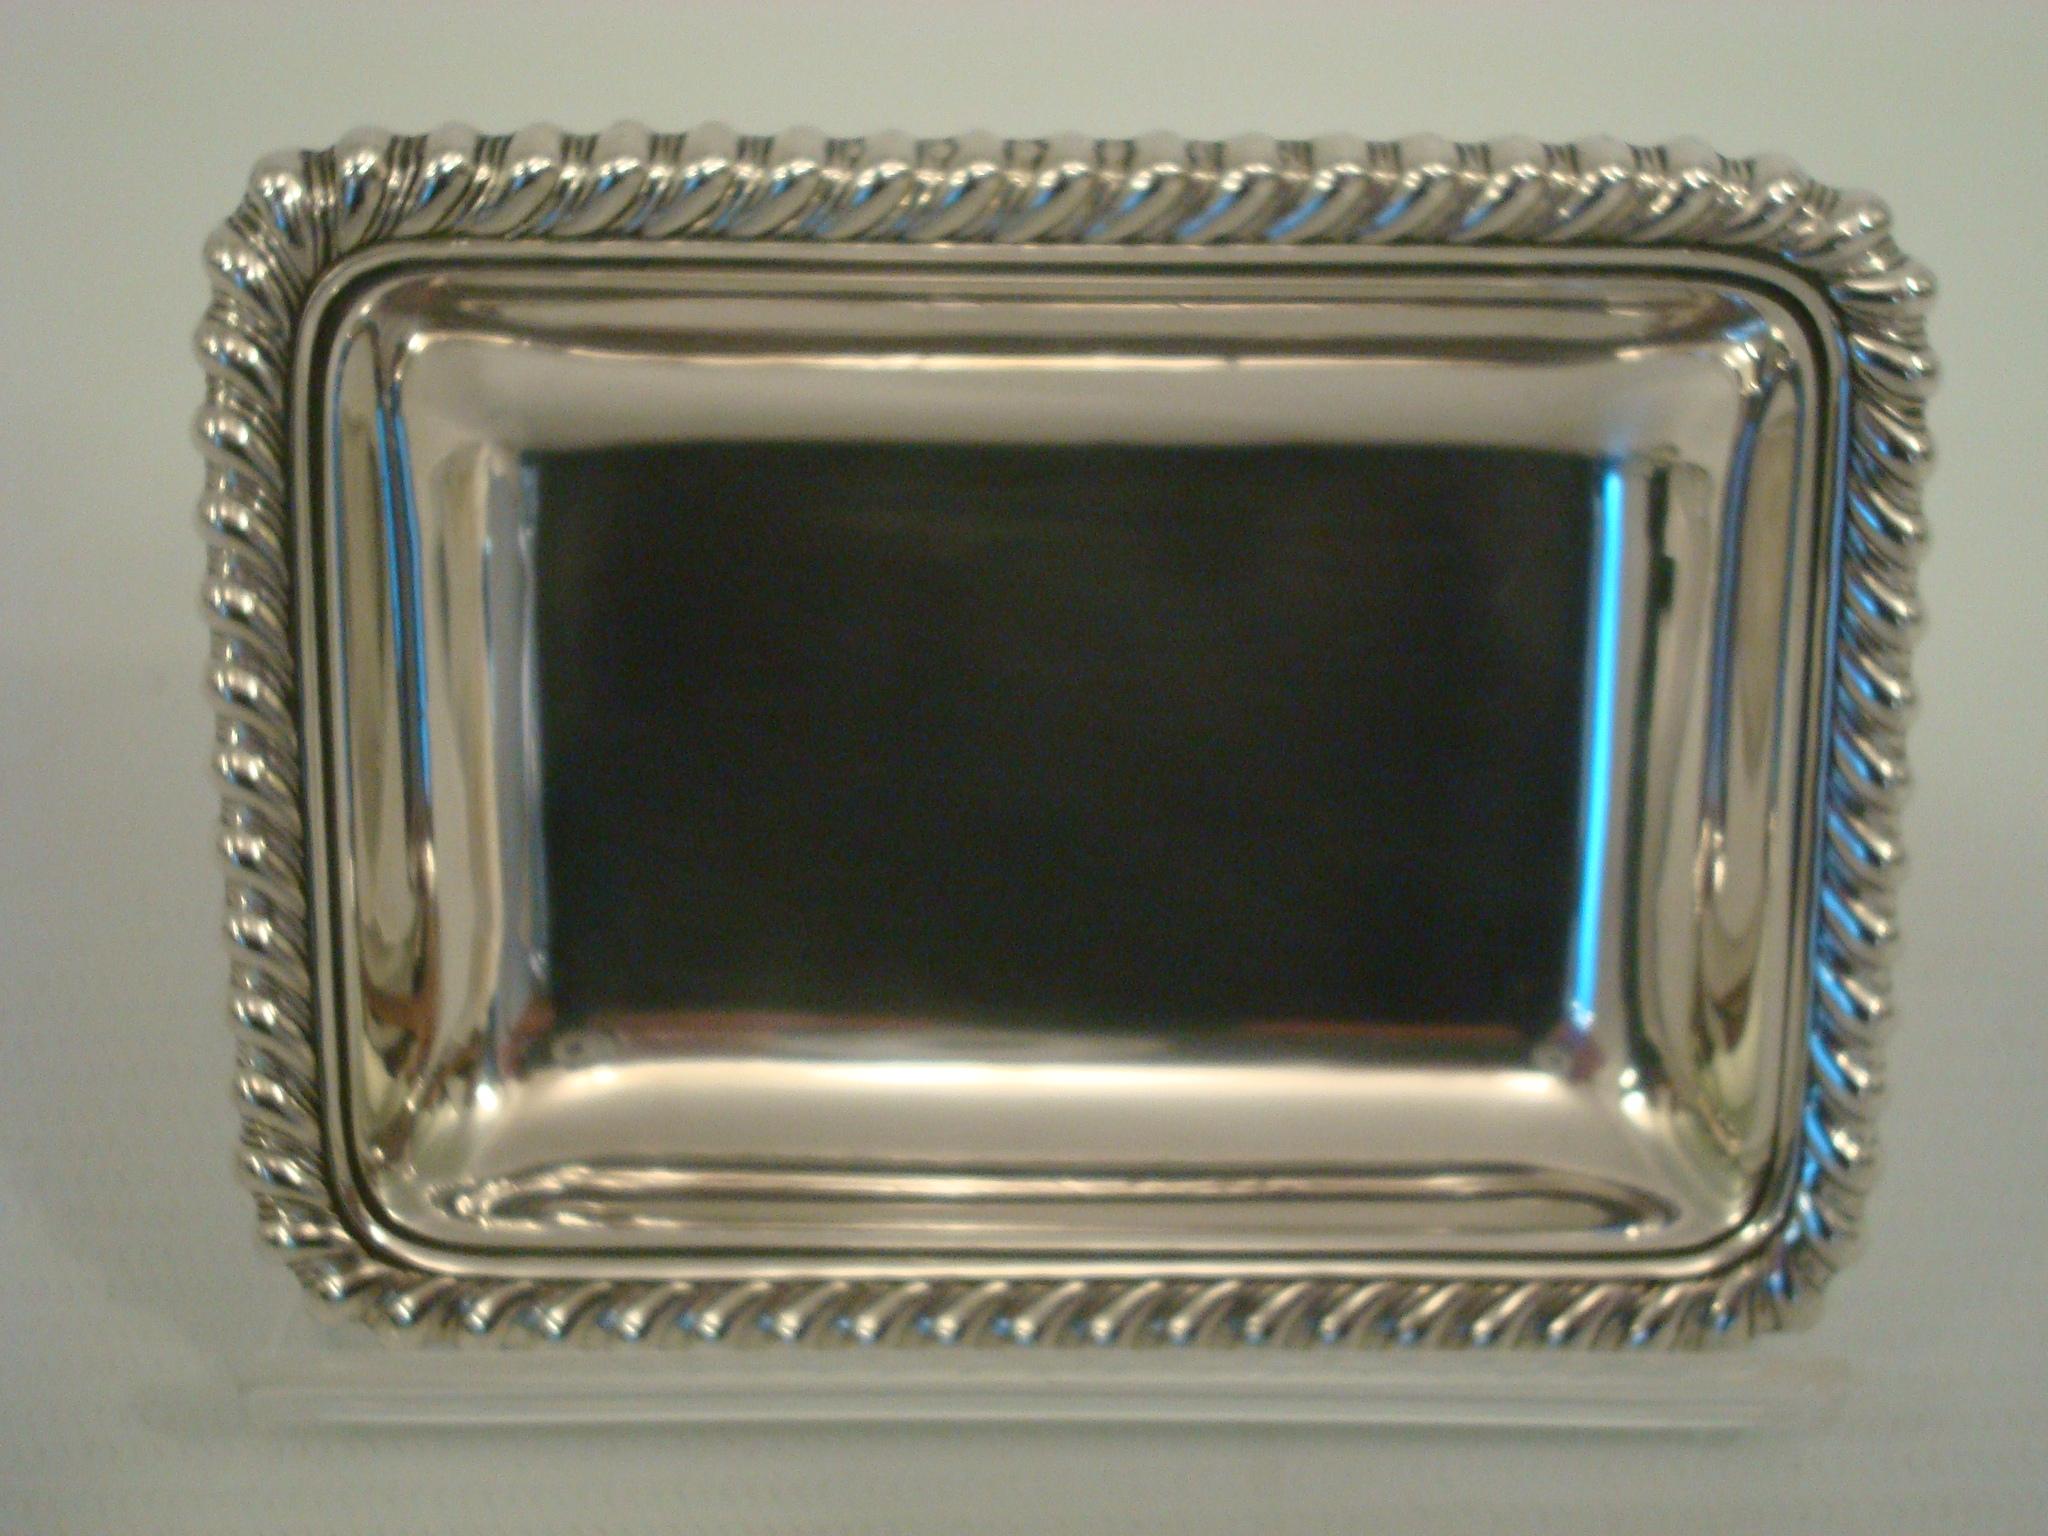 French Cartier Jewelry Dish or a Personal Cards / Keys / Trinket Tray / Coins Plate For Sale